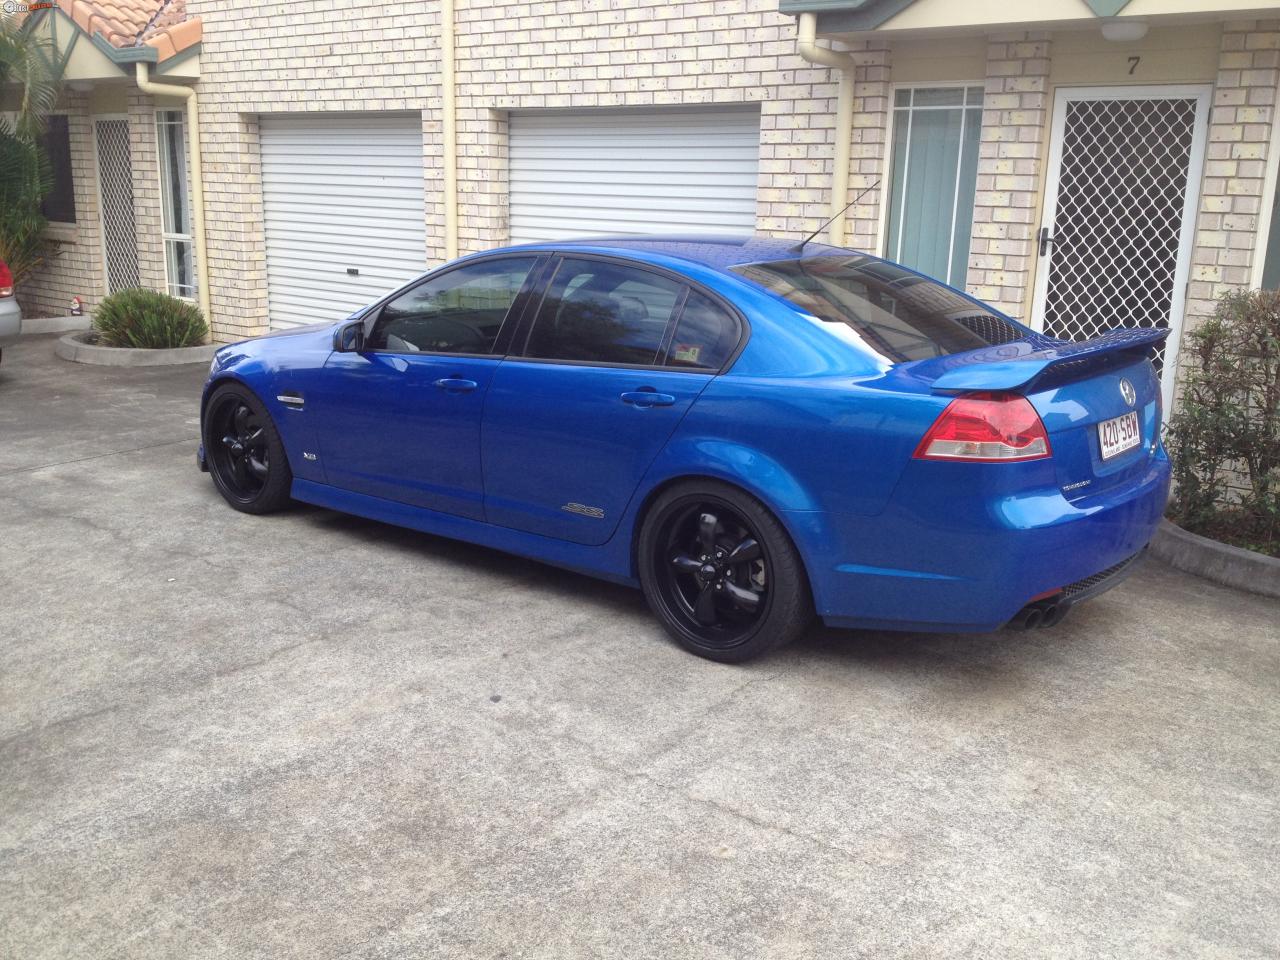 2001 Holden Commodore Vx Ss